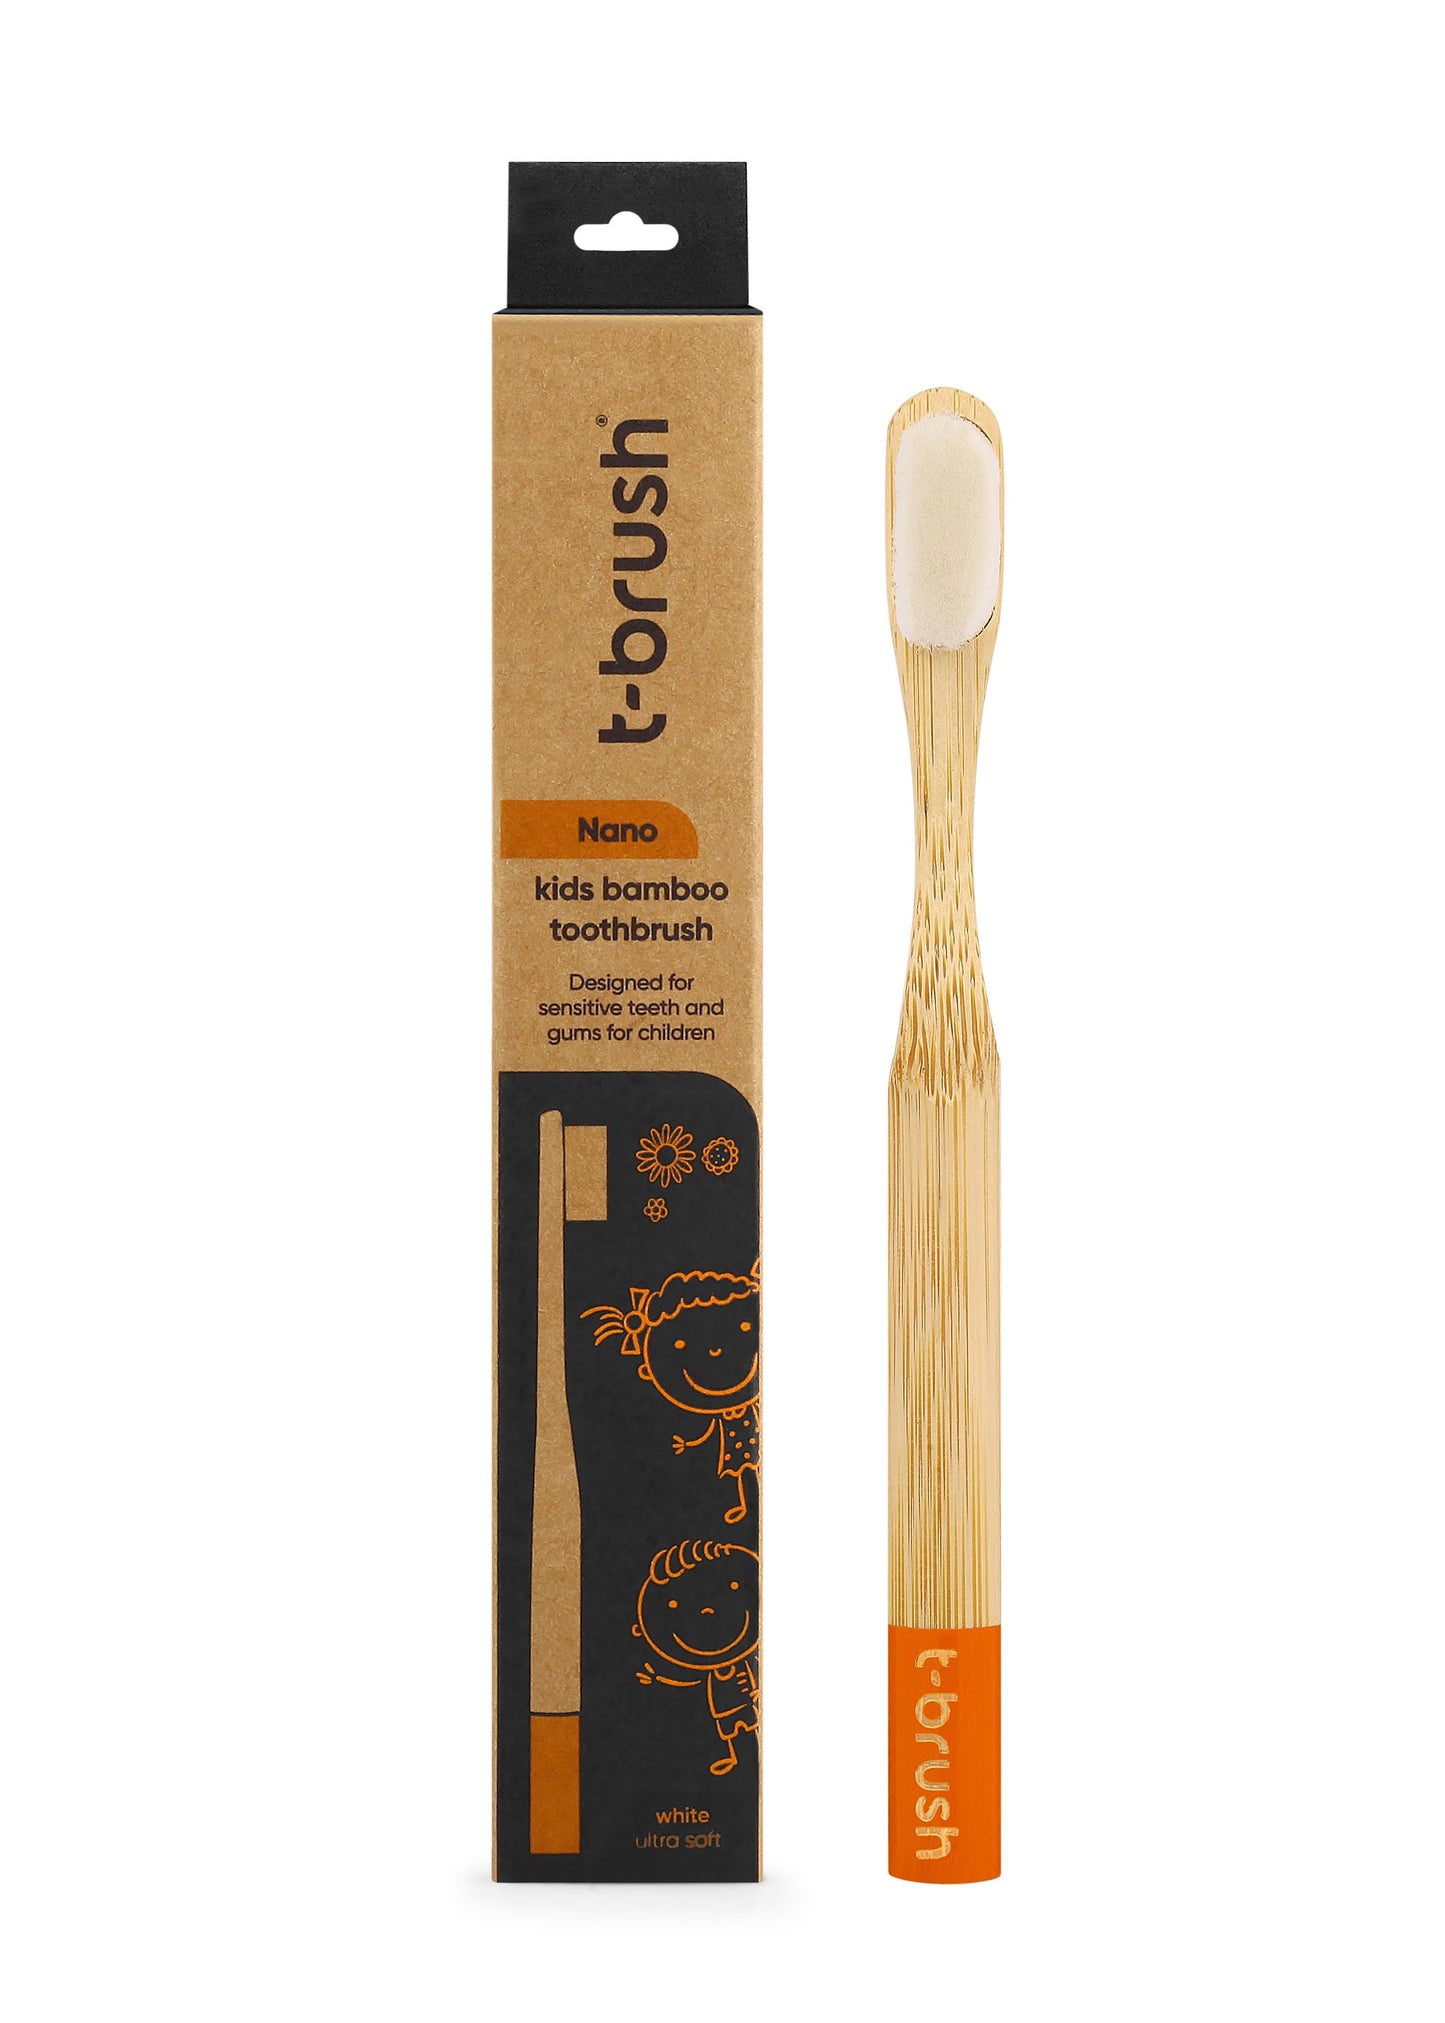 T-Brush Nono Kids Bamboo Toothbrush - Dupont Bristles - The Best Duo = Dupont + Bamboo - Best Gift - Natural Toothbrush -Essential Oral Care